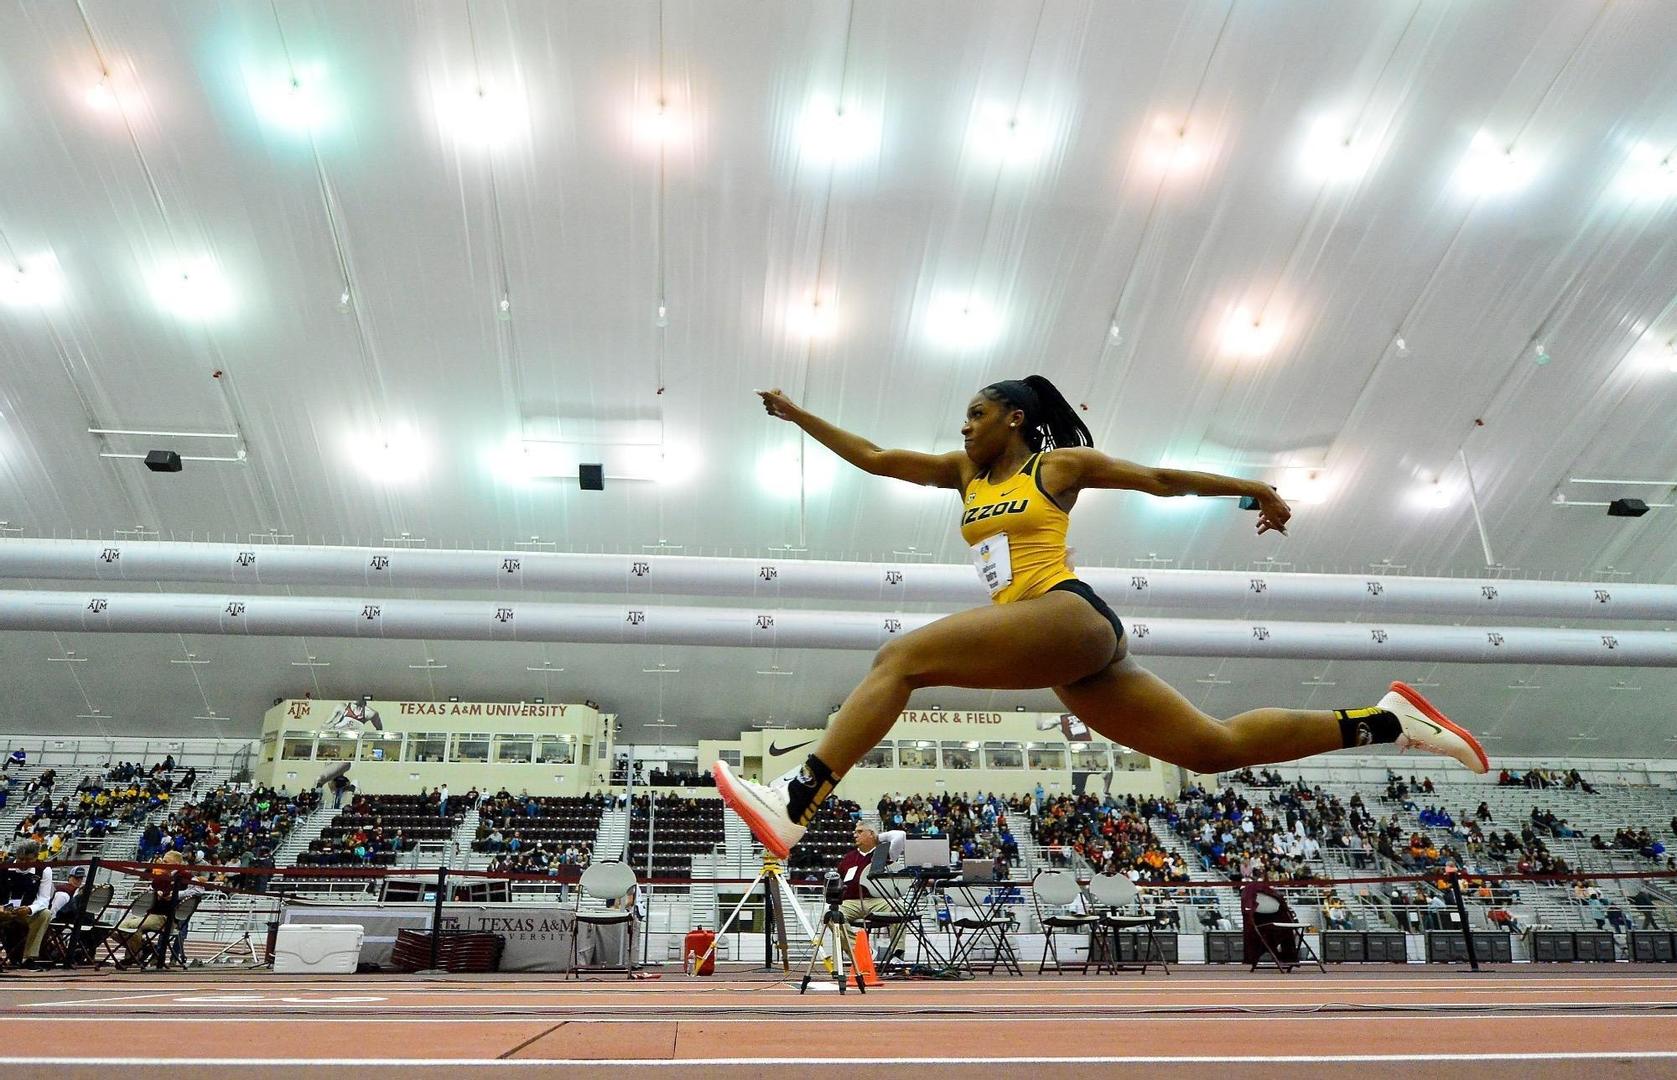 Euphenie Andre Mizzou Tigers at SEC Indoor Championships in College Station, TX. on Saturday, February 26, 2022. (Photo by Jeff Curry)